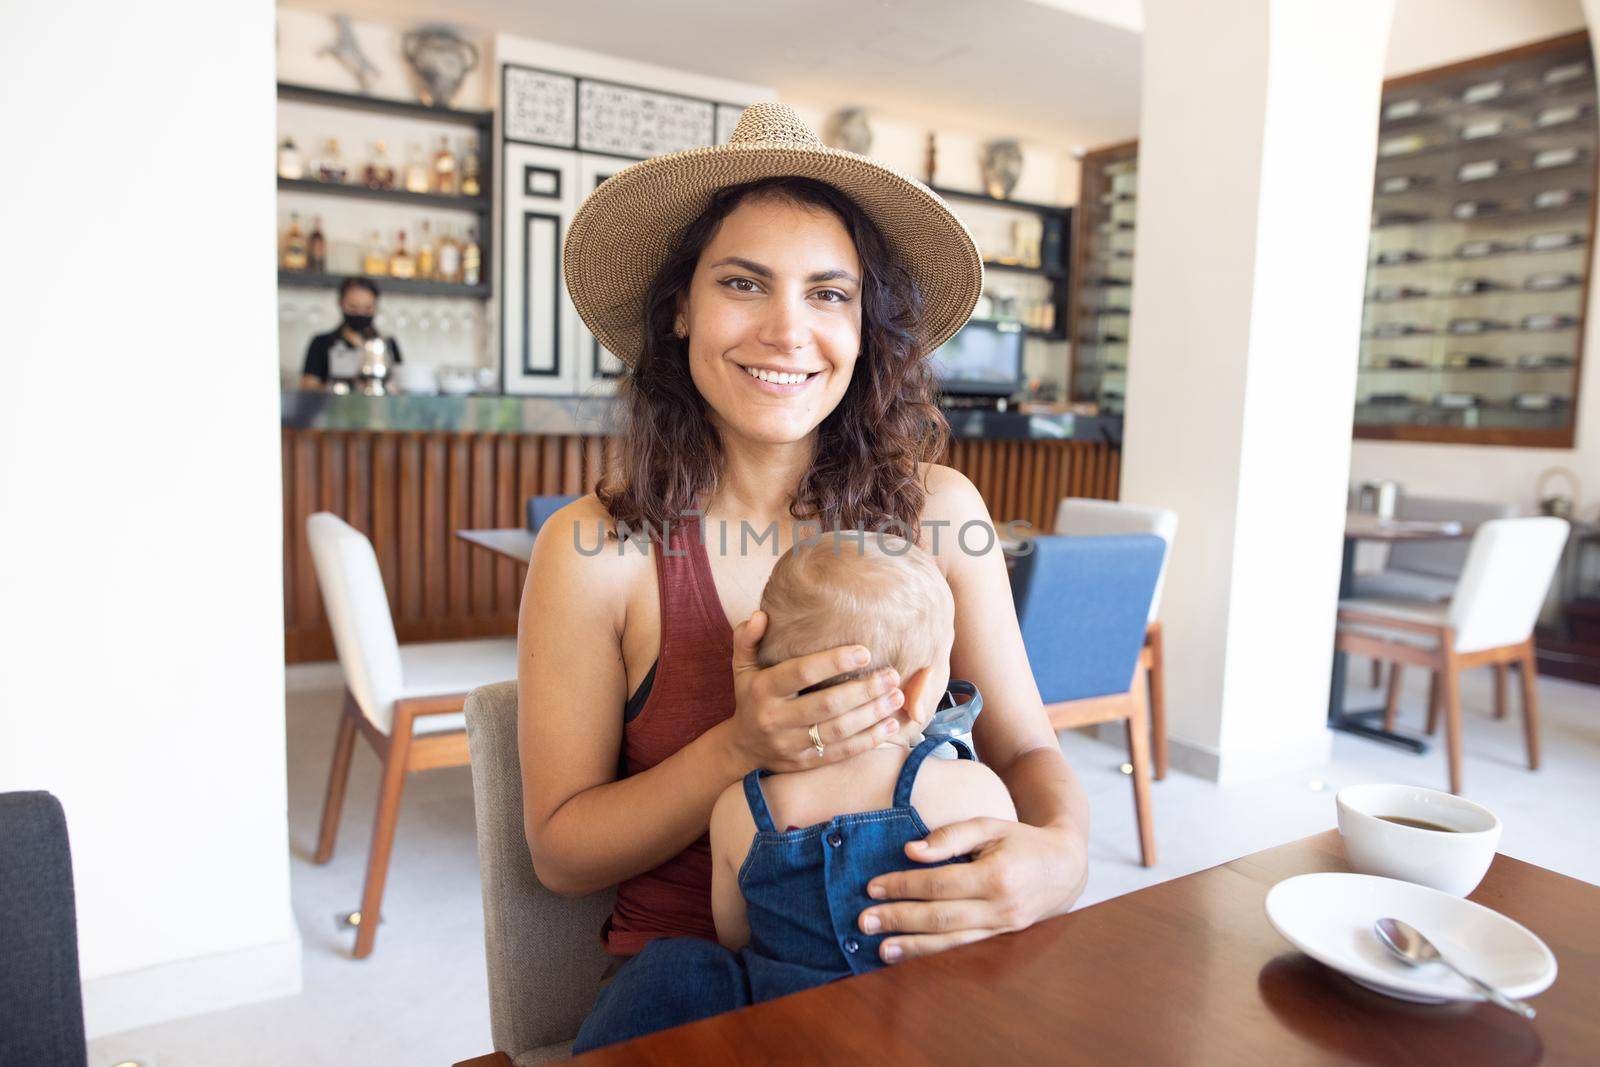 Portrait of beautiful smiling mother wearing a hat and holding adorable baby in restaurant. Happy brunette woman and young daughter at table with cafe counter as background. Lovely family on holiday